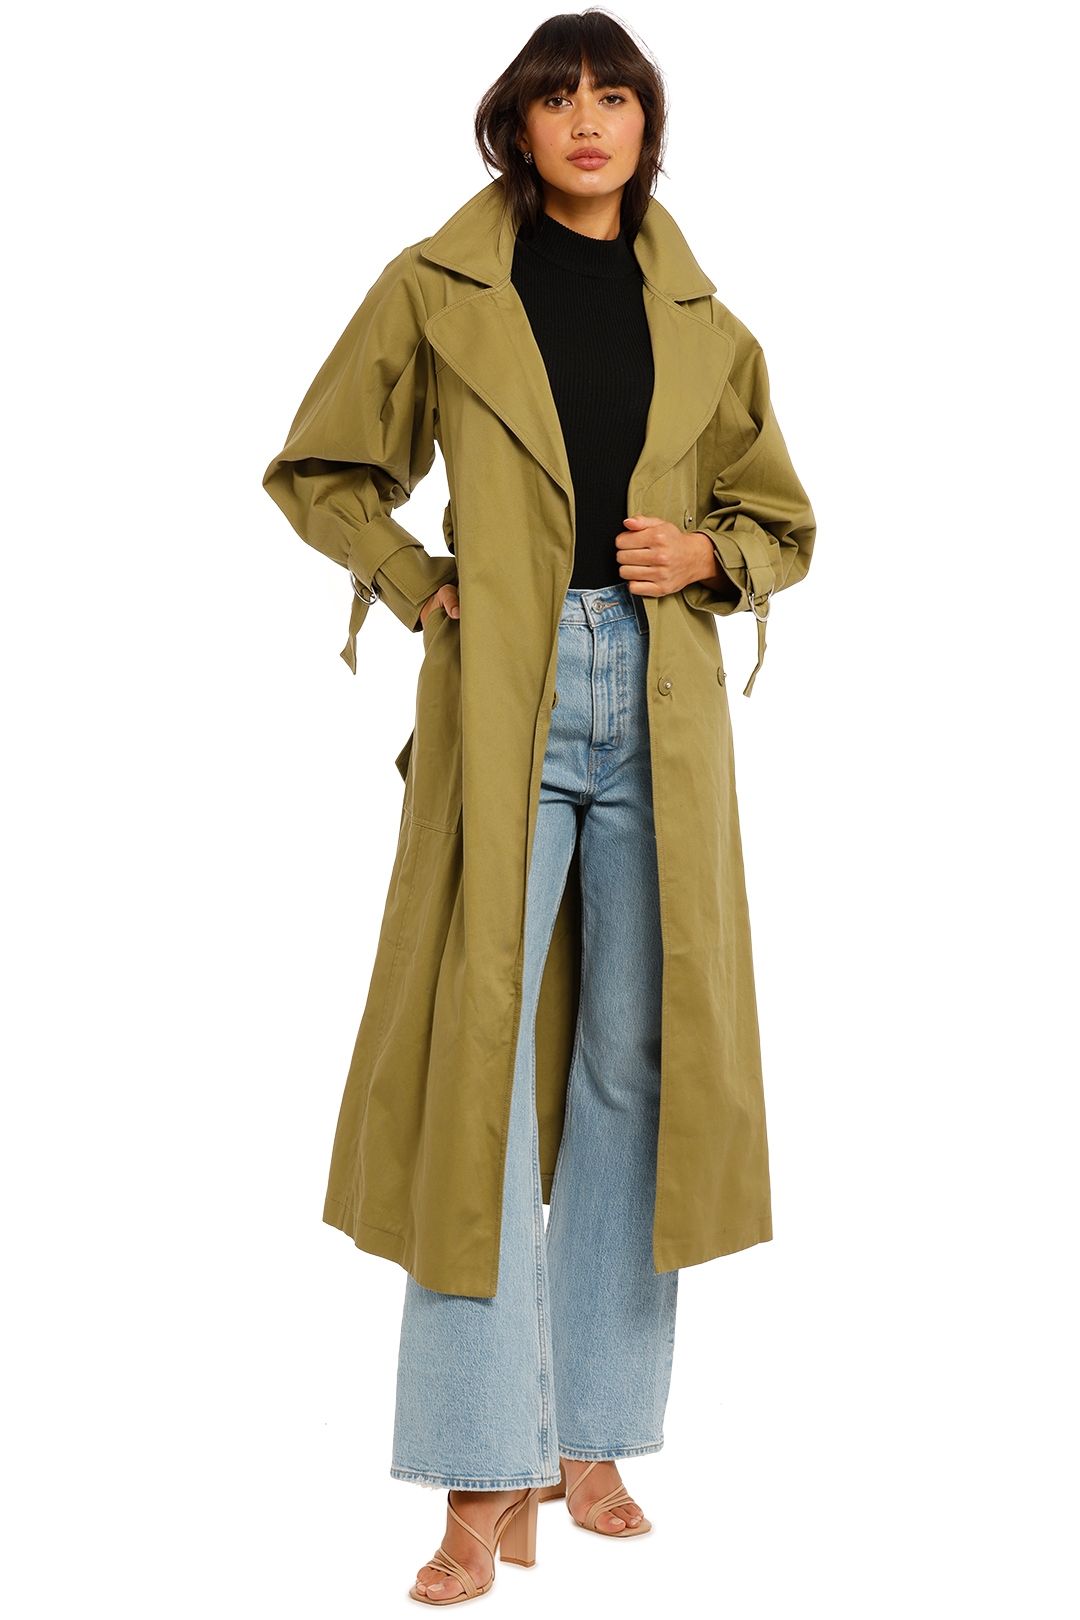 Magali Pascal Stevie Trench Olive belted